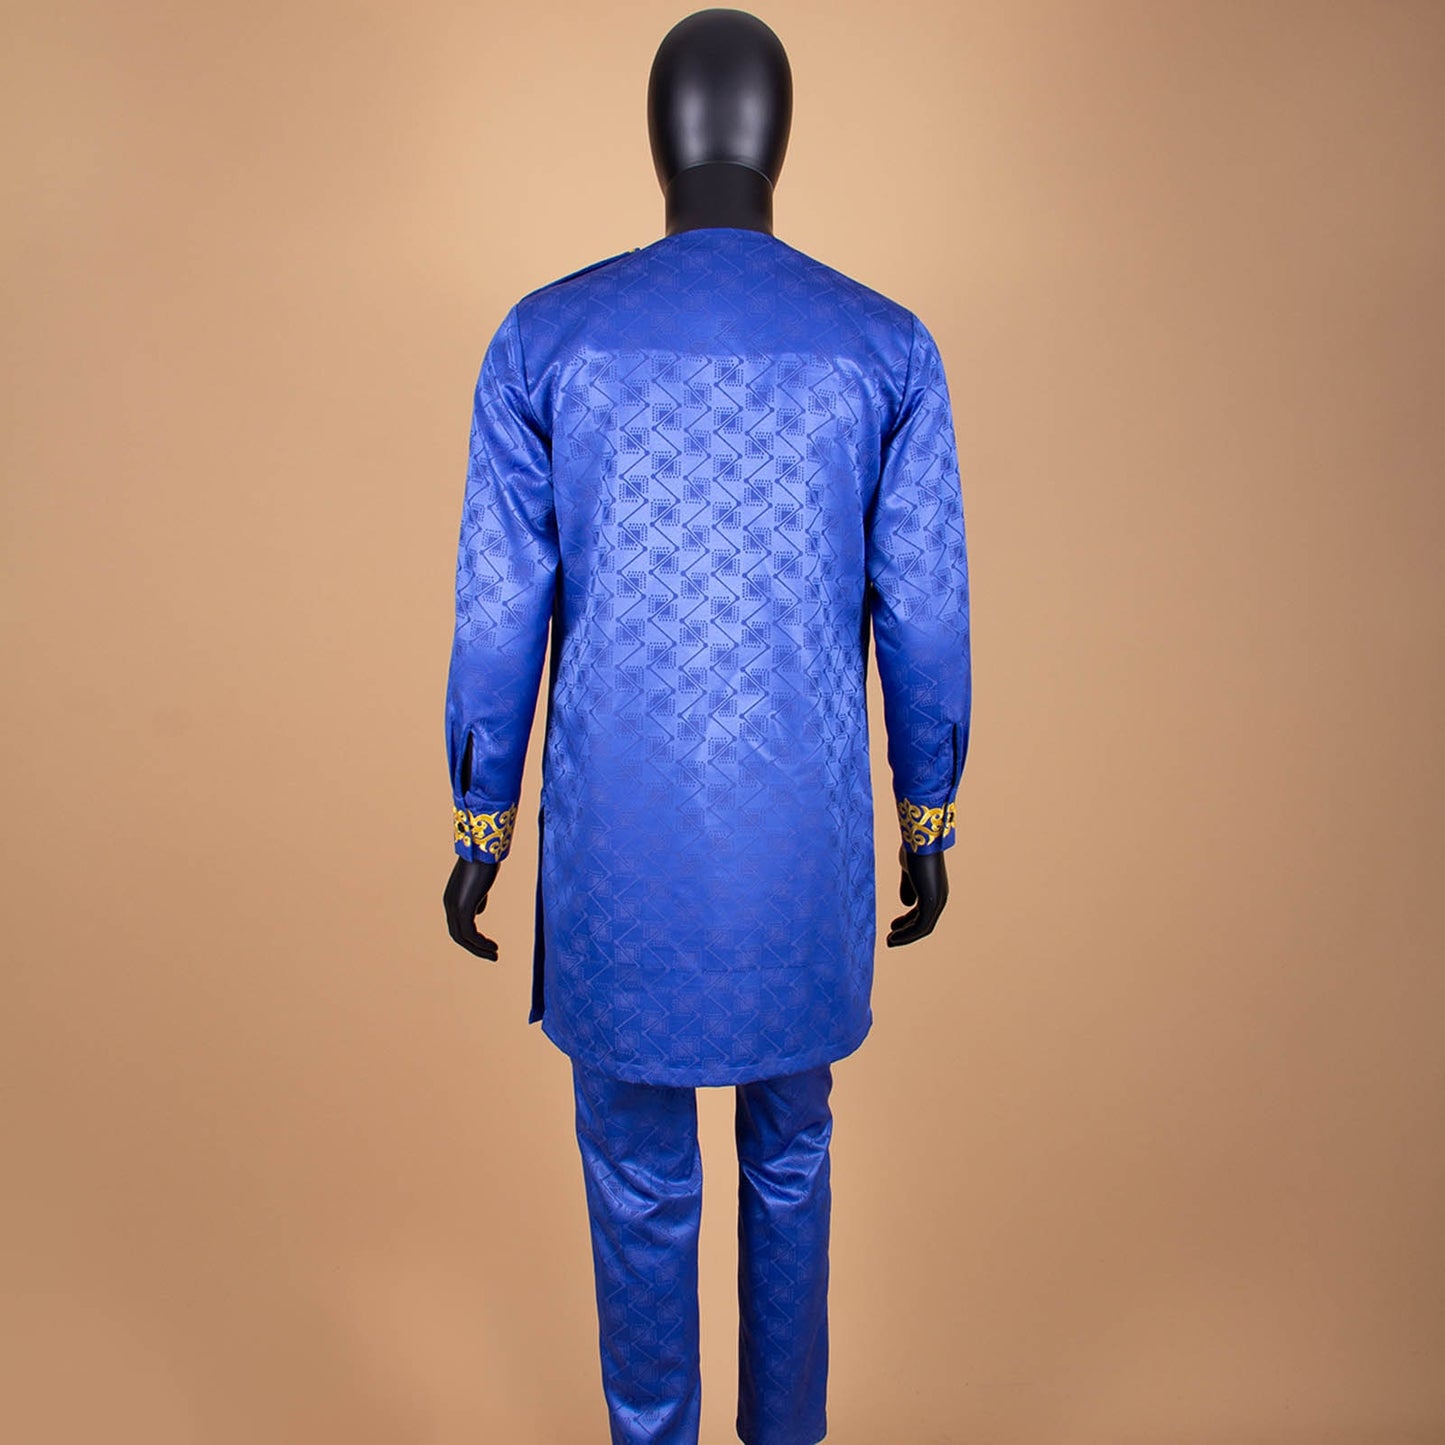 New Fashion African Men's Embroidered Shirt and Trousers 2-piece Set Festival Bazin Riche Wedding Evening Clothes A2216026 - Bekro's ART